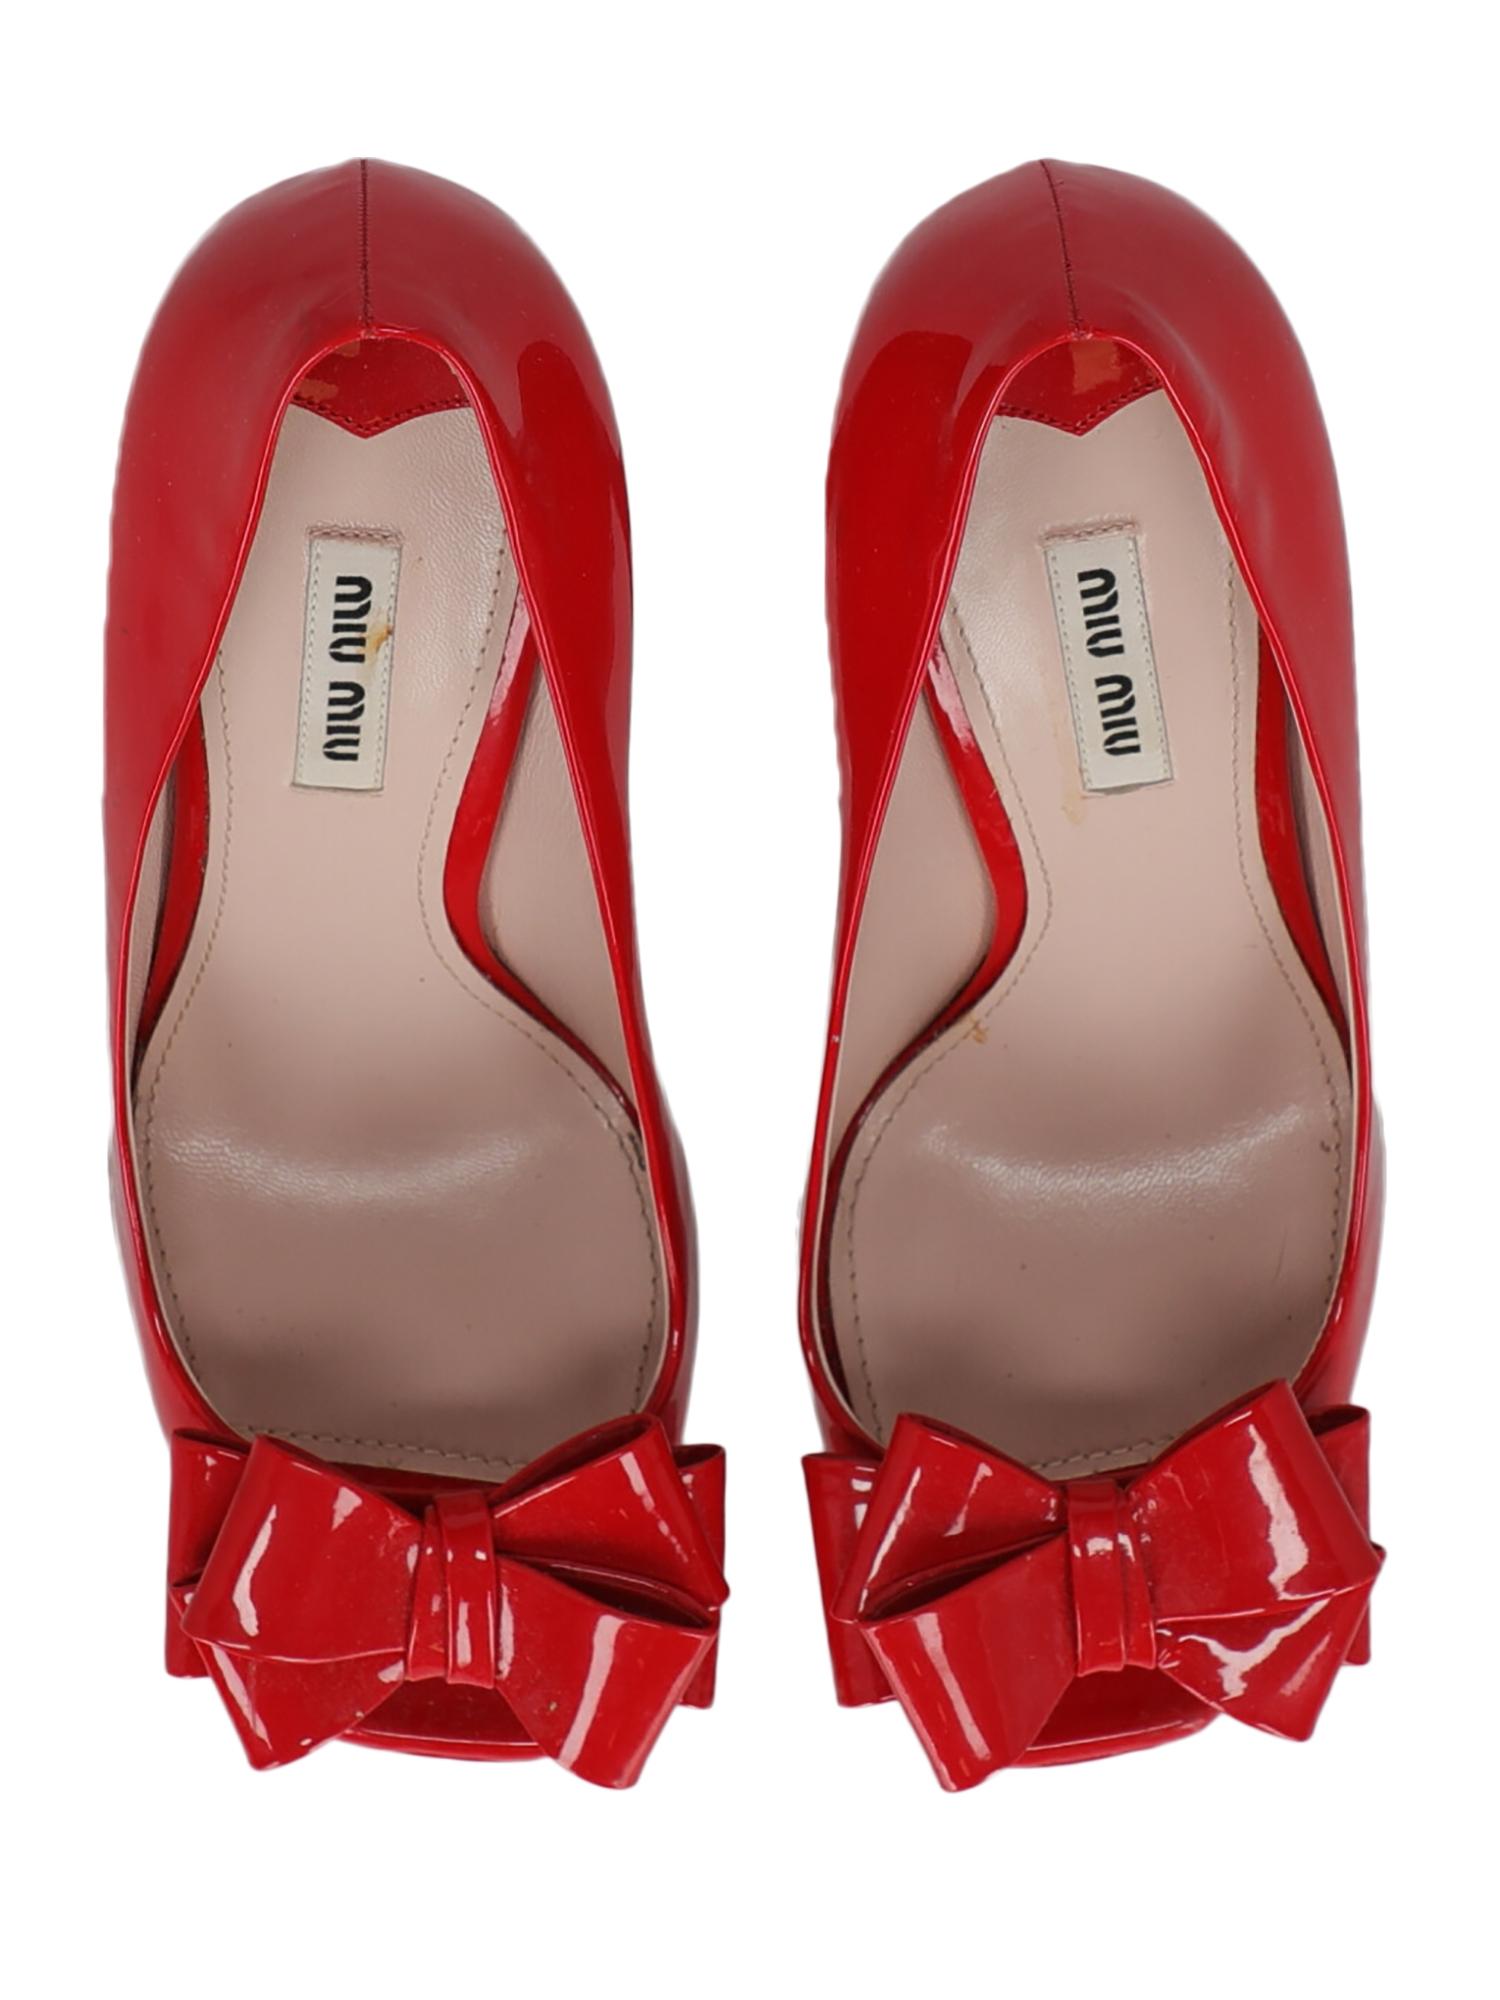 Miu Miu Woman Pumps Red Leather IT 39.5 For Sale 2